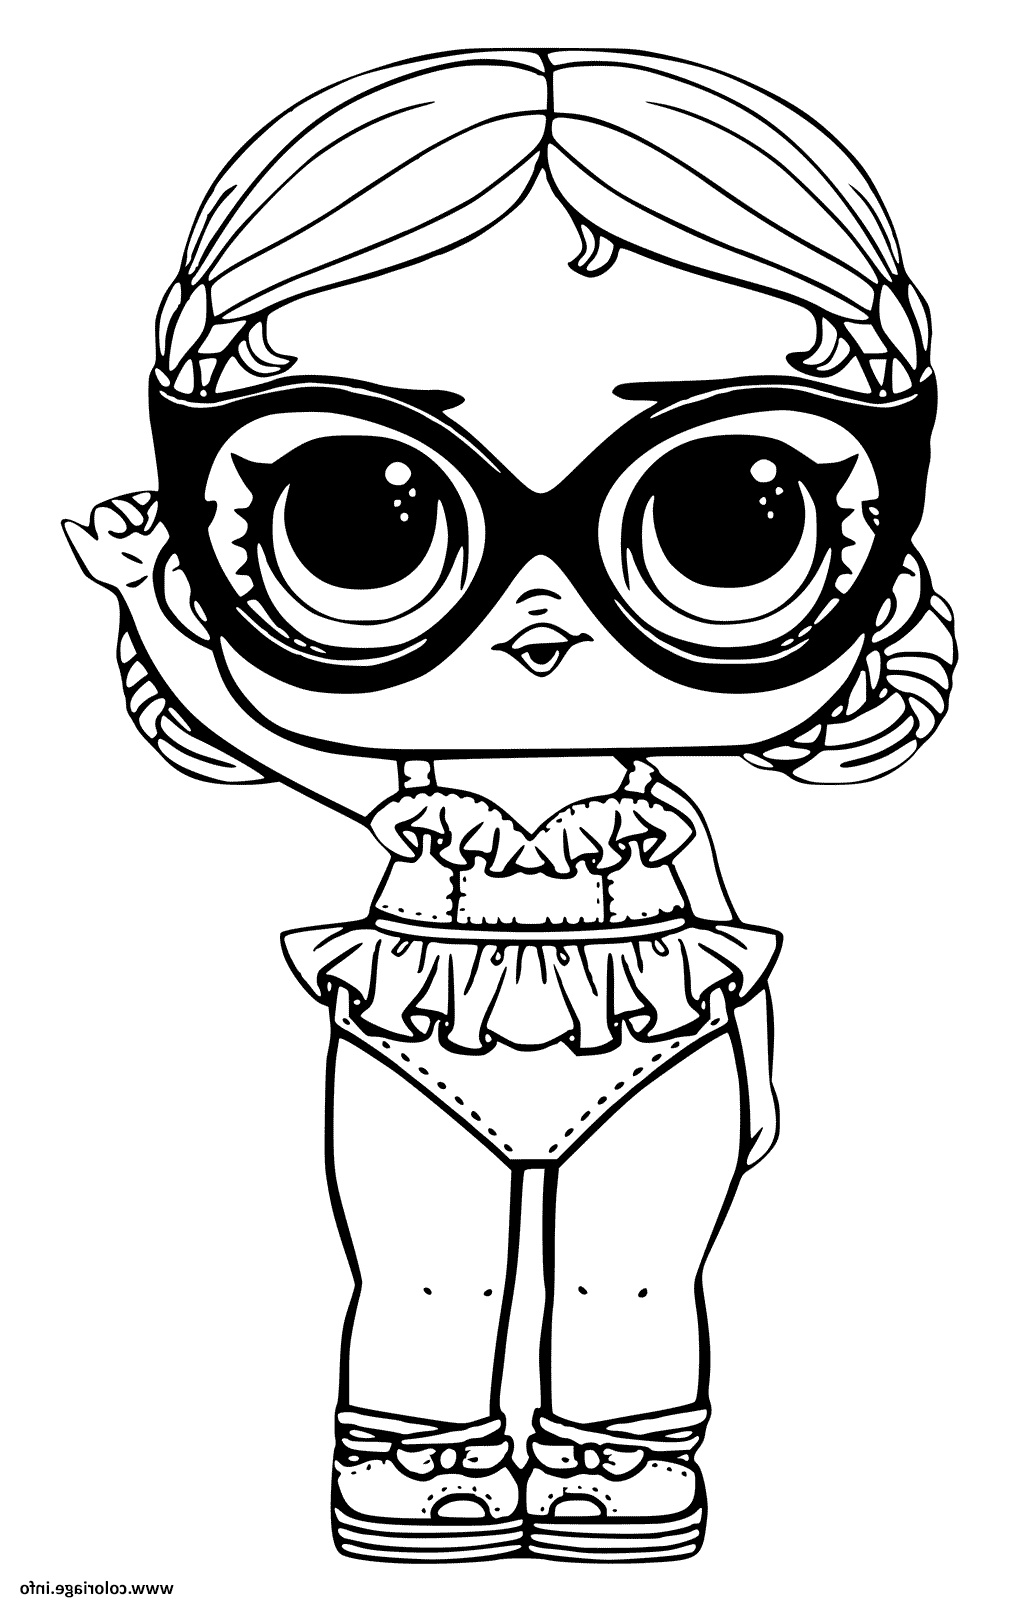 Coloriage A Imprimer Poupee Lol Luxe Galerie Coloriage Page Of Lol Doll Vacay Babay à Imprimer